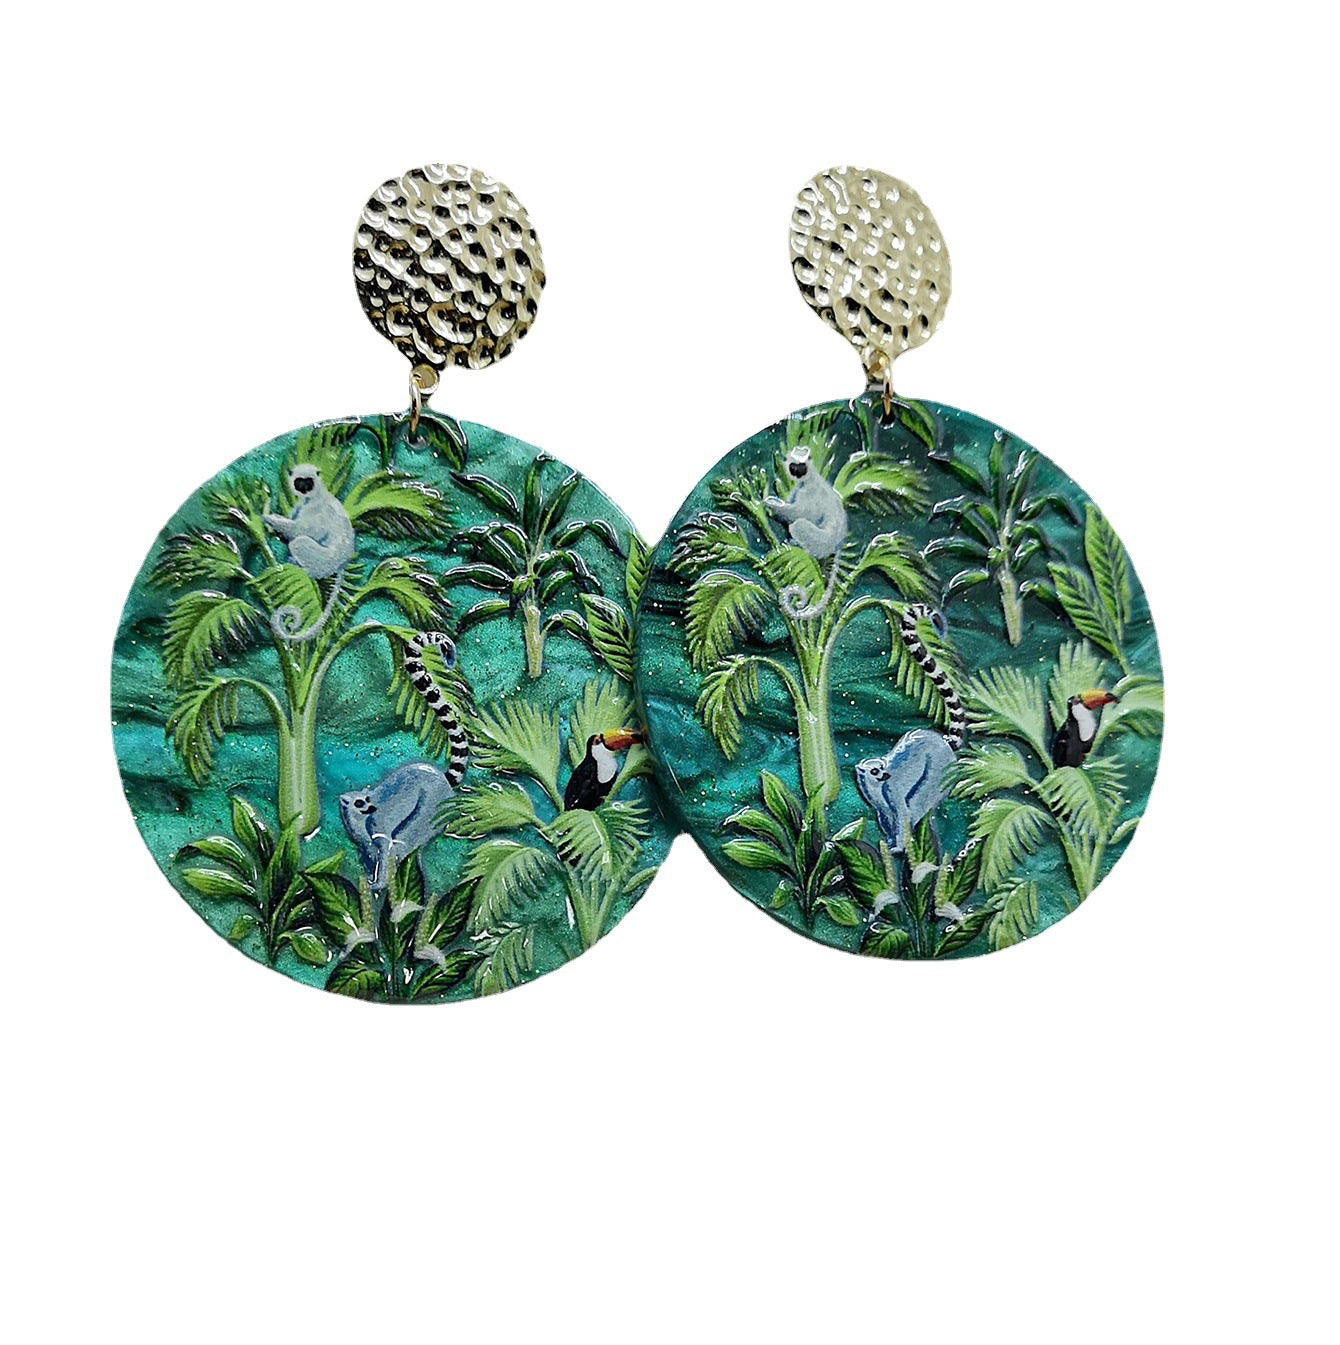 Green Rainforest Flora and Fauna 3D relief printed acrylic design sense exaggerated accessory earrings-canovaniajewelry